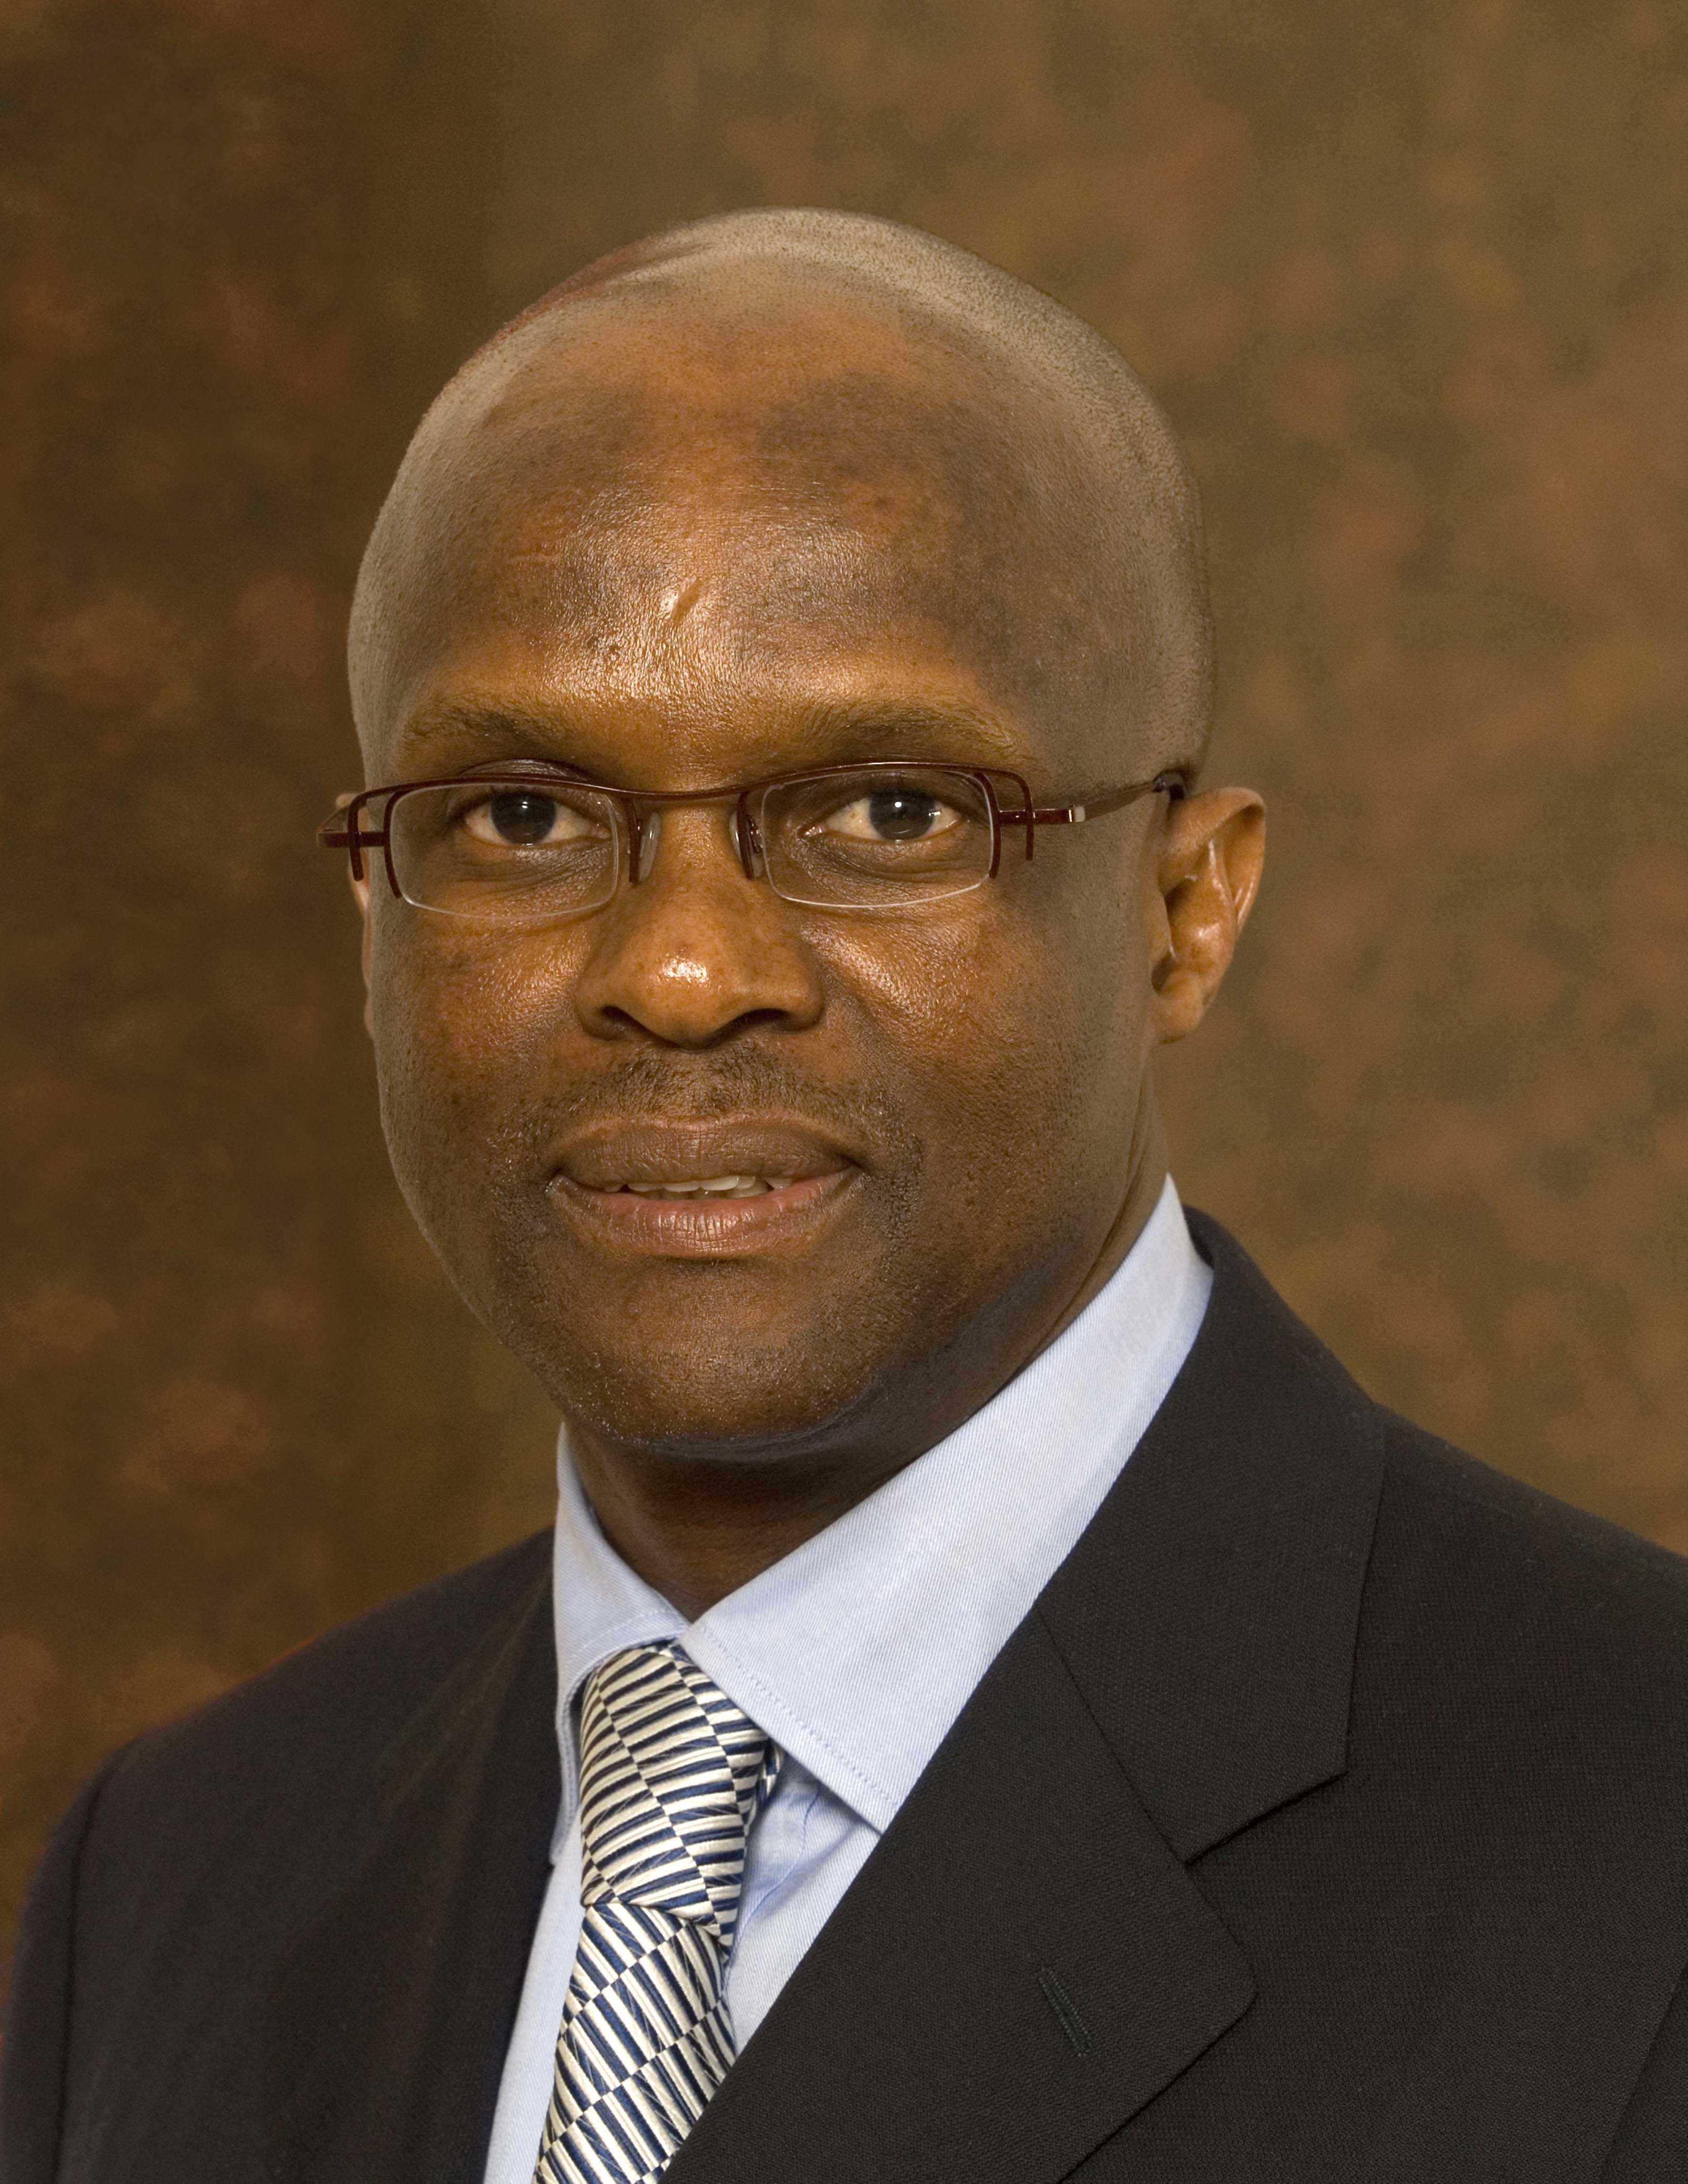 South Africa's Deputy Minister of Correctional Services, Thabang Makwetla. Photo: Department of Correctional Services